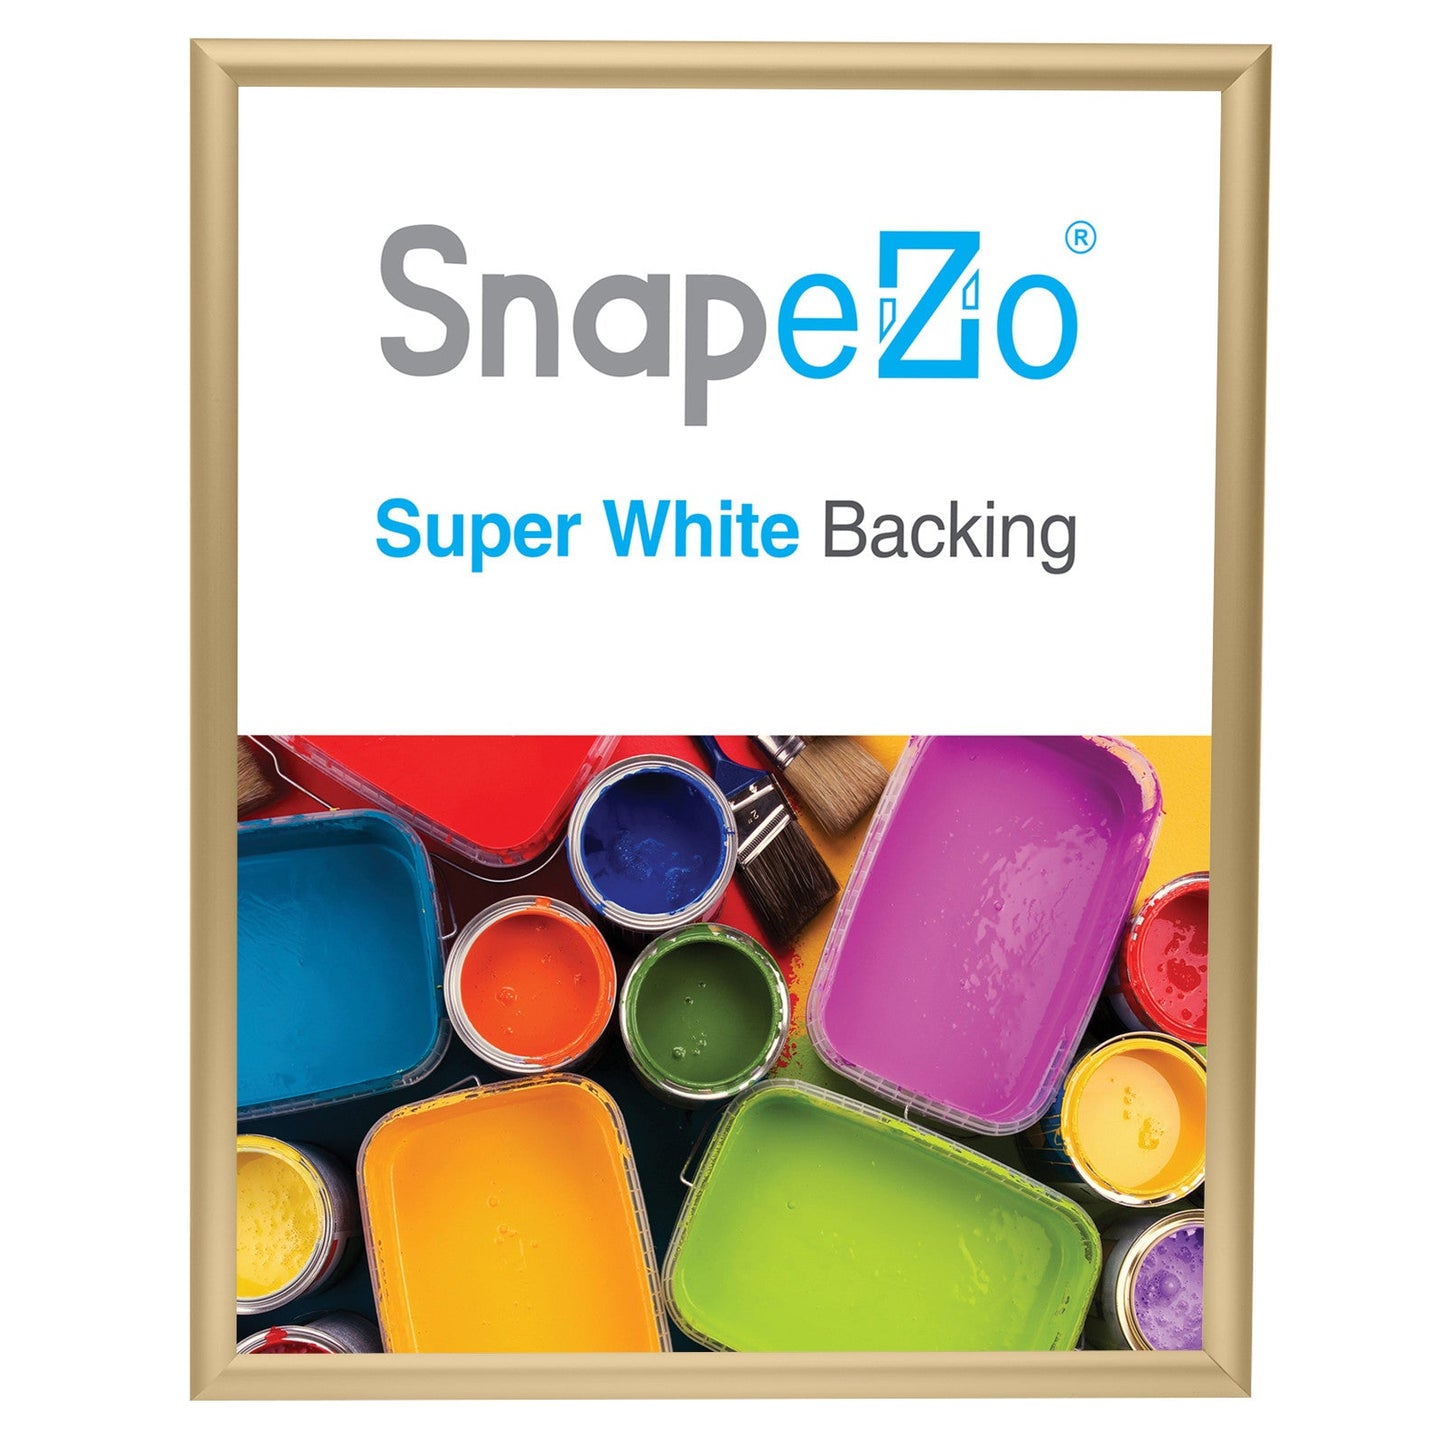 Load image into Gallery viewer, 24x30 Gold SnapeZo® Snap Frame - 1&amp;quot; Profile
